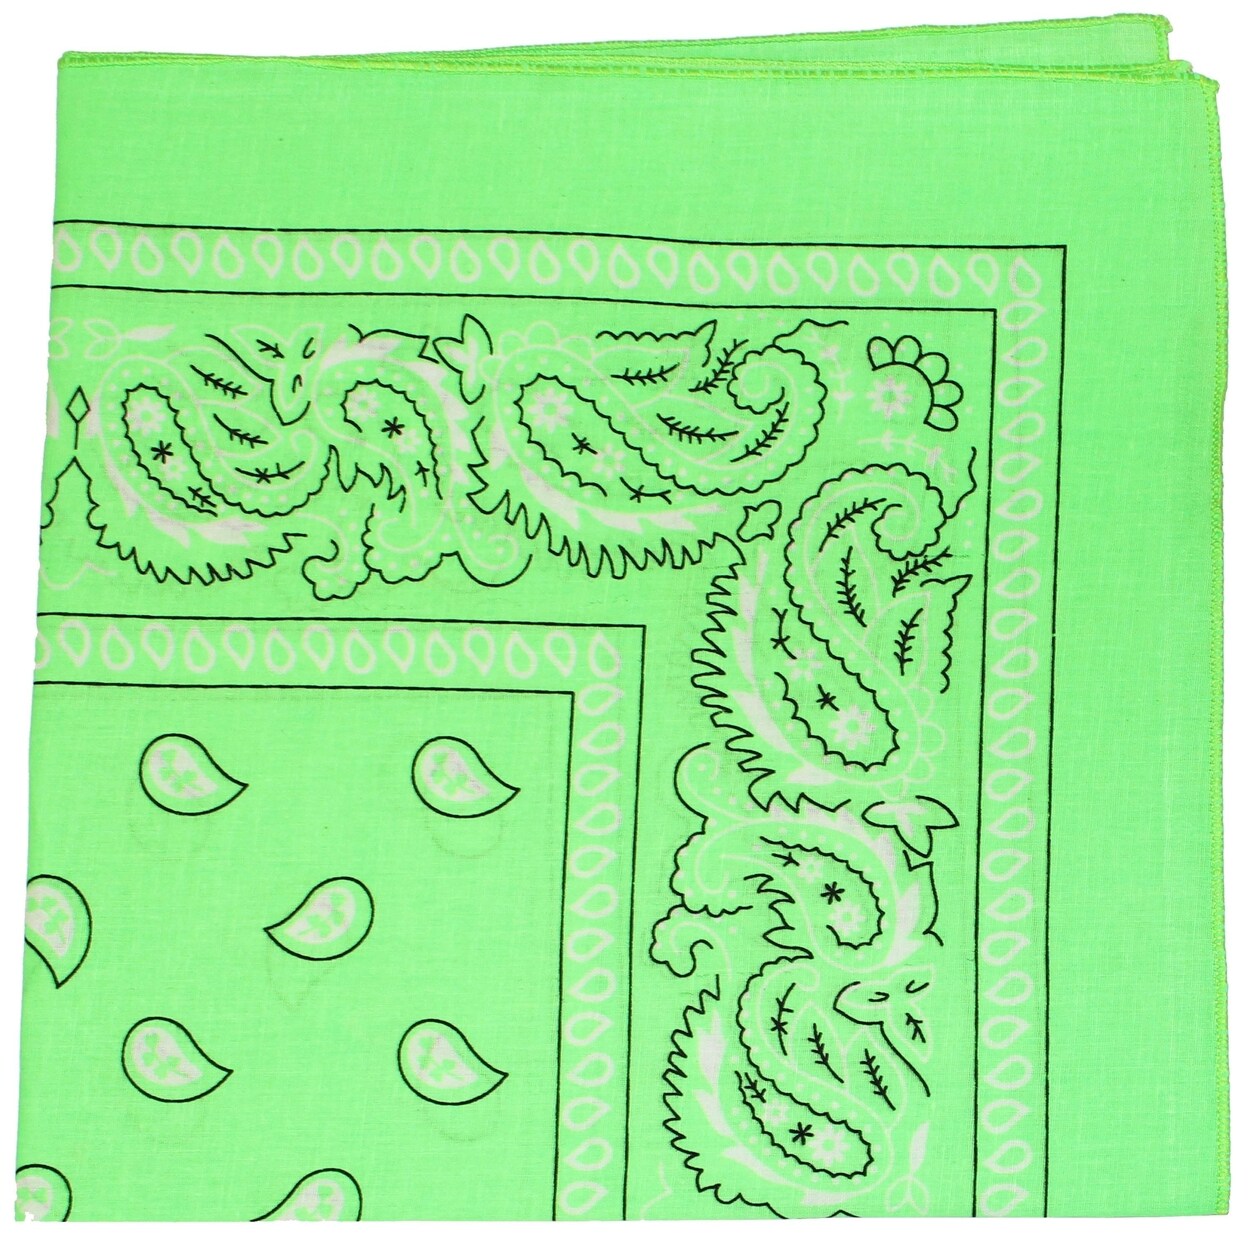 Qraftsy   Neon Colors Paisley Bandana - Cotton - Available in 1 Pack or 3 Pack